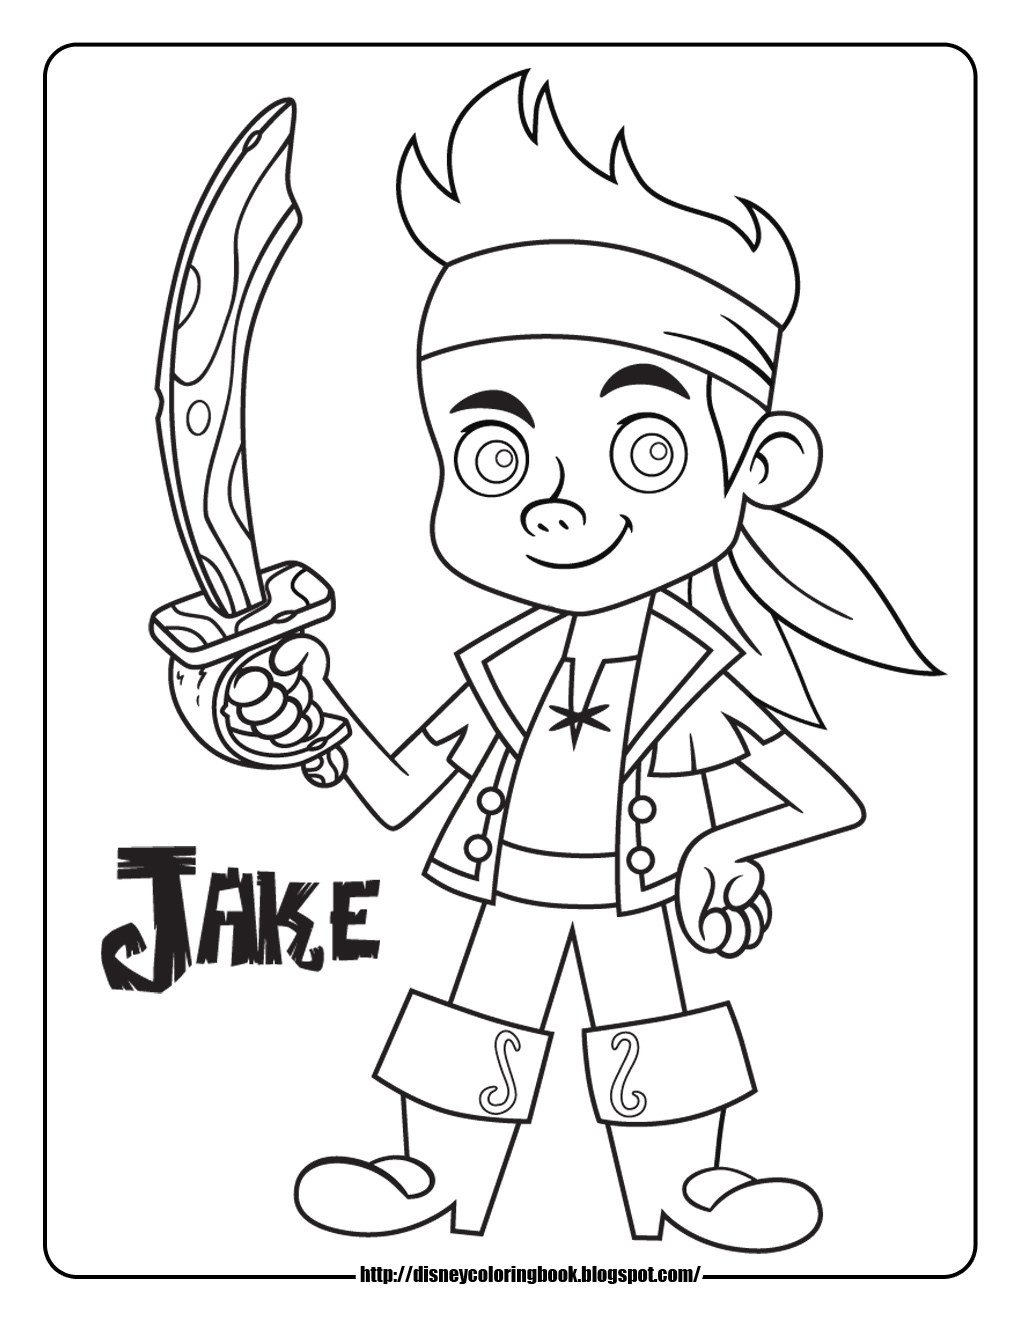 Jake And The Neverland Pirates Coloring Pages
 Jake and the Neverland Pirates 1 Free Disney Coloring